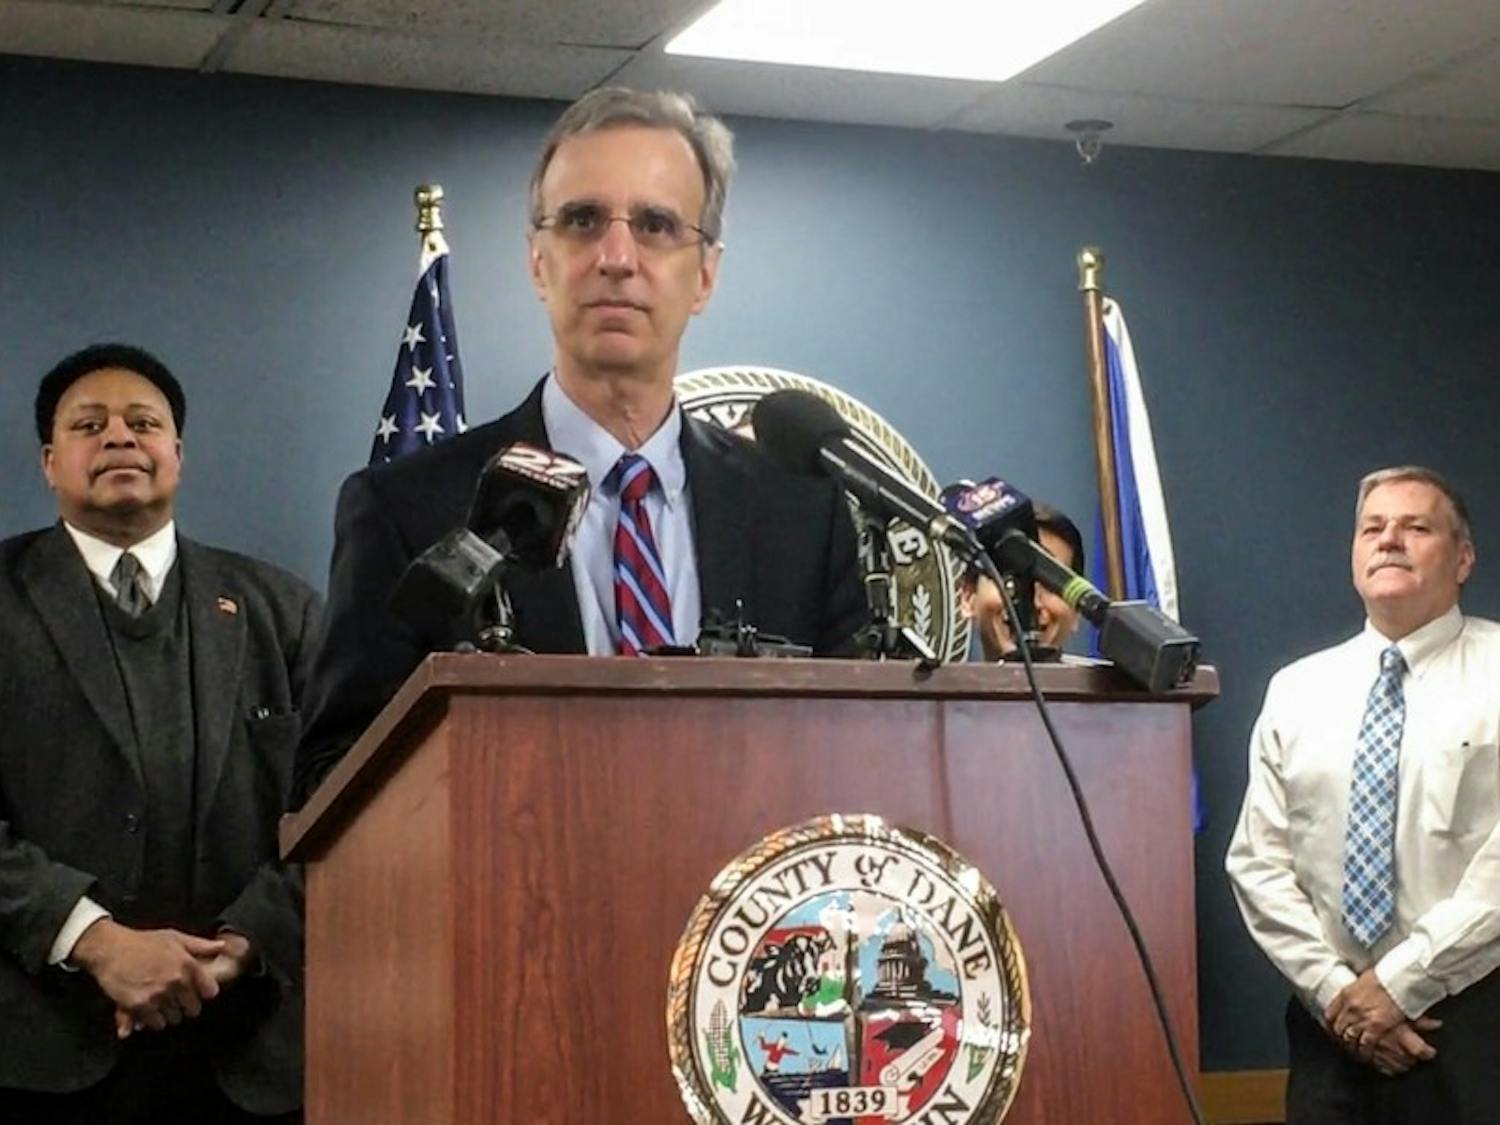 Dane County Executive Joe Parisi announced today that Dane County will be working with&nbsp;Baron and Budd in filing a federal lawsuit against drug&nbsp;manufacturers and distributors for their role in fueling the opioid epidemic.